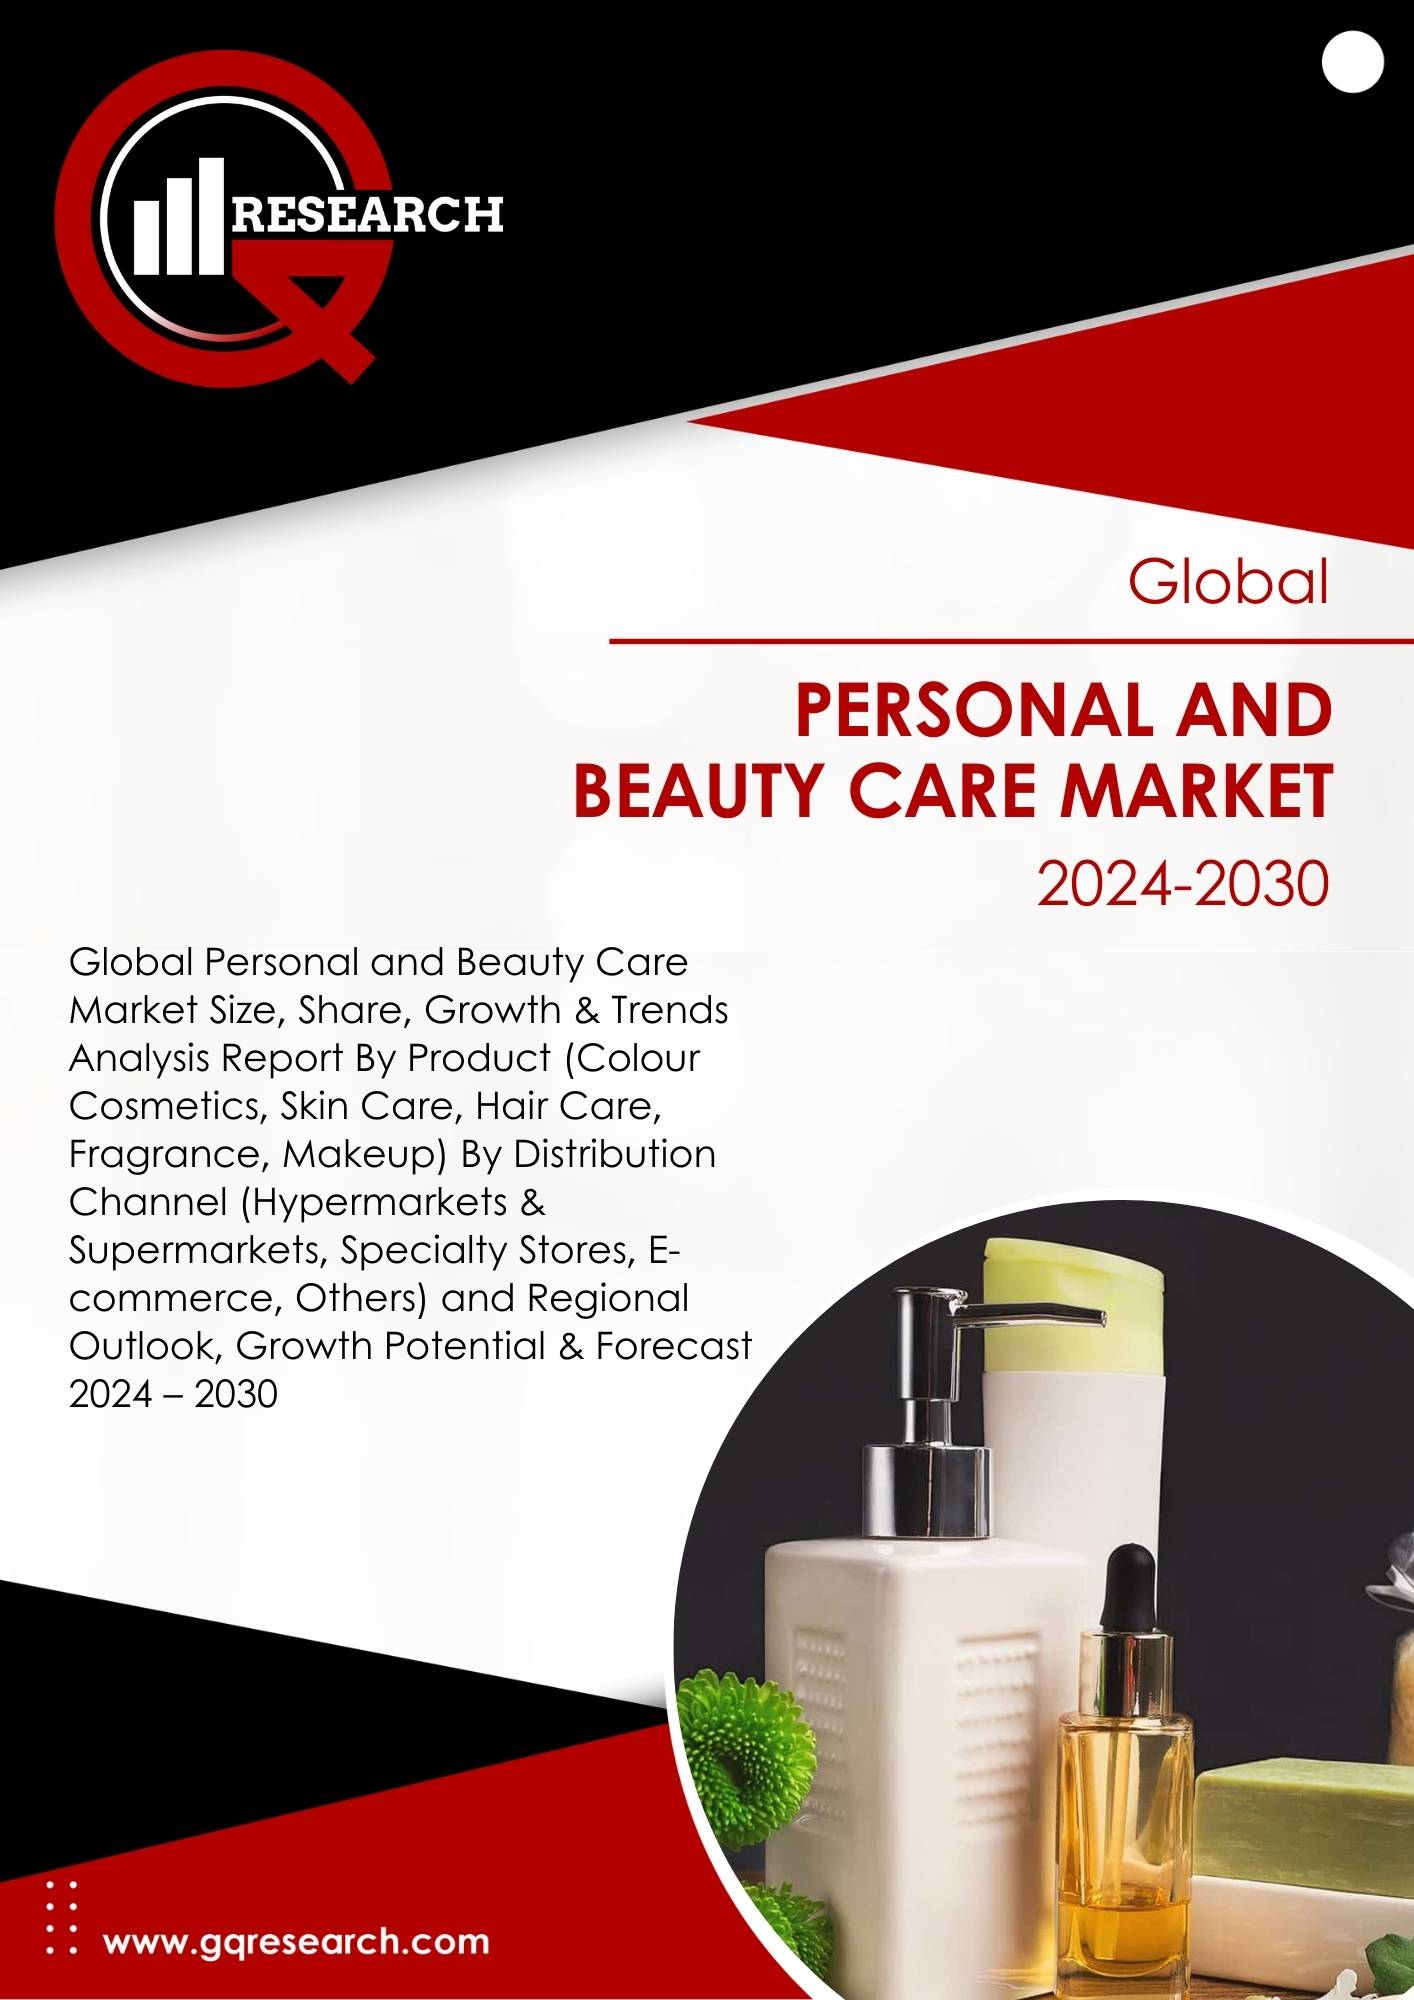 Personal and Beauty Care Market Size, Share, Growth and Forecast to 2030 | GQ Research